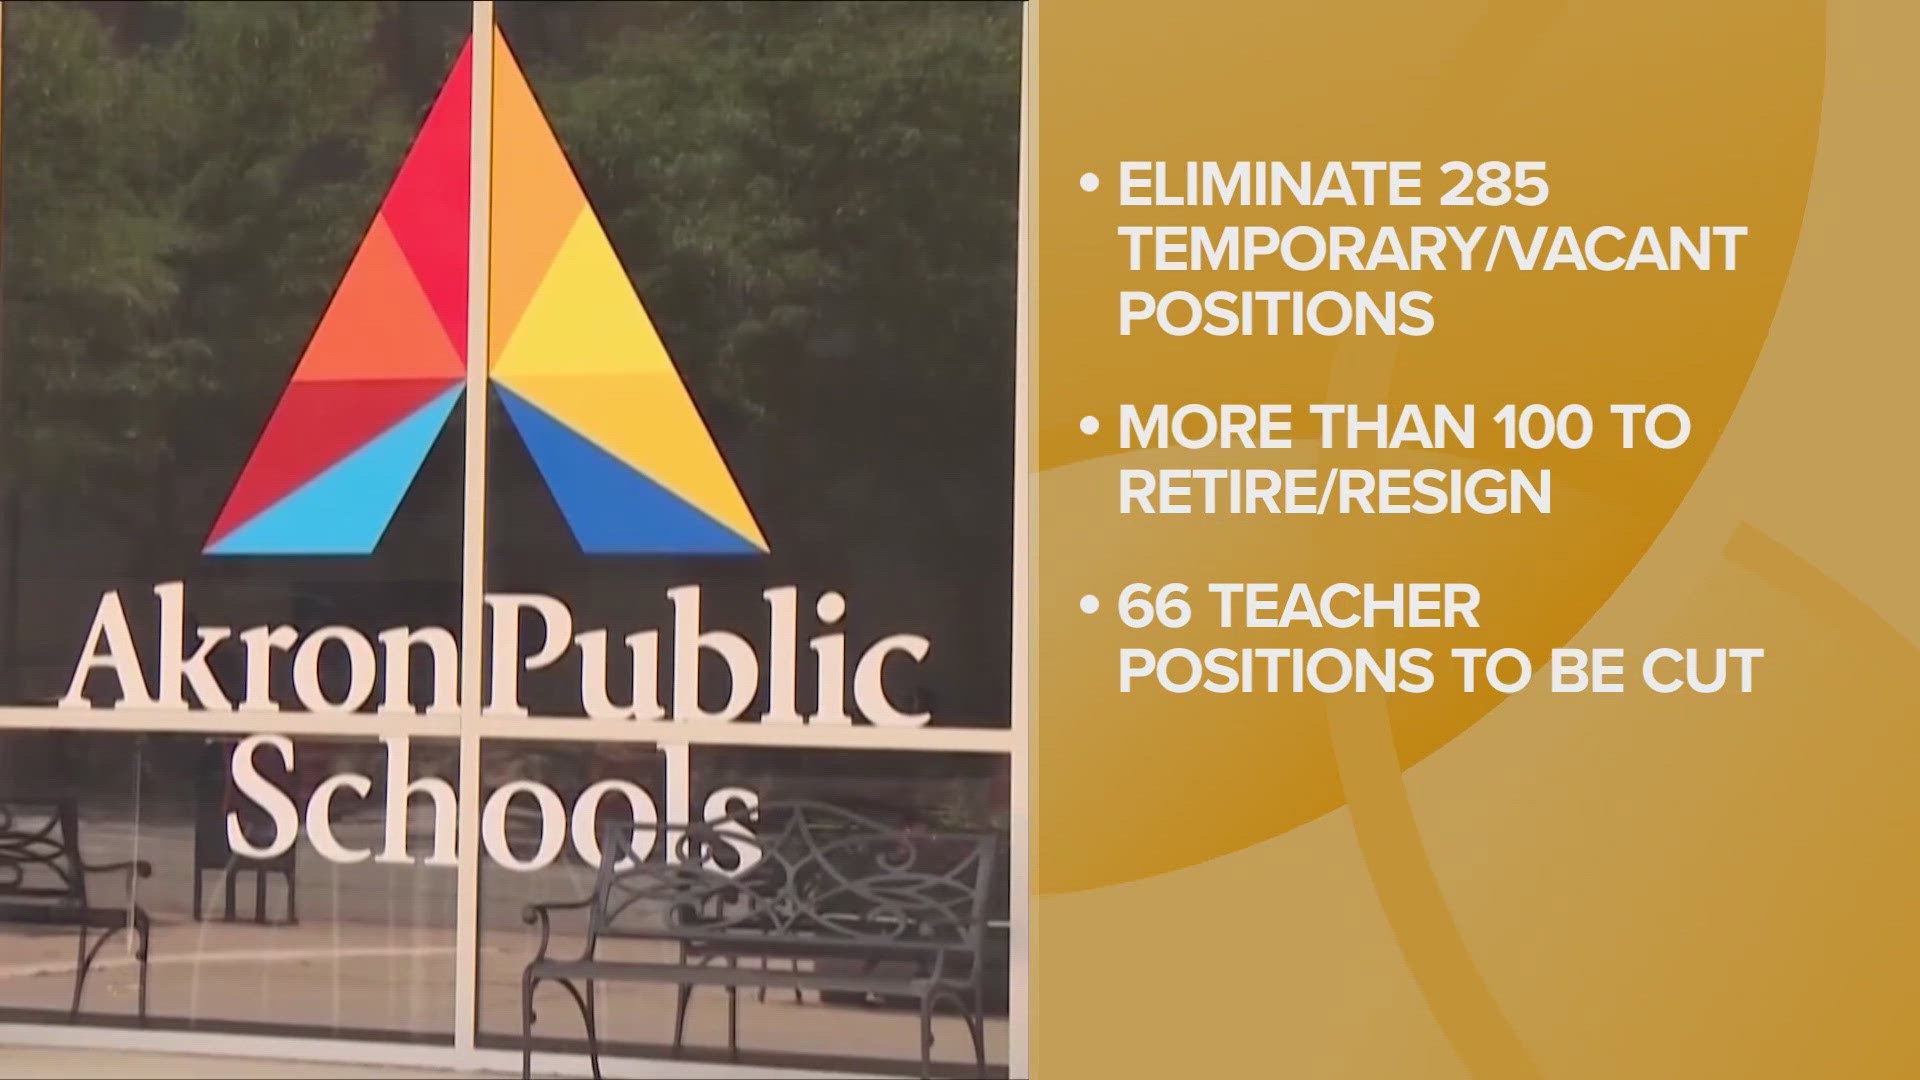 In order to rectify the budget, the district says it has to eliminate 285 temporary / vacant positions.